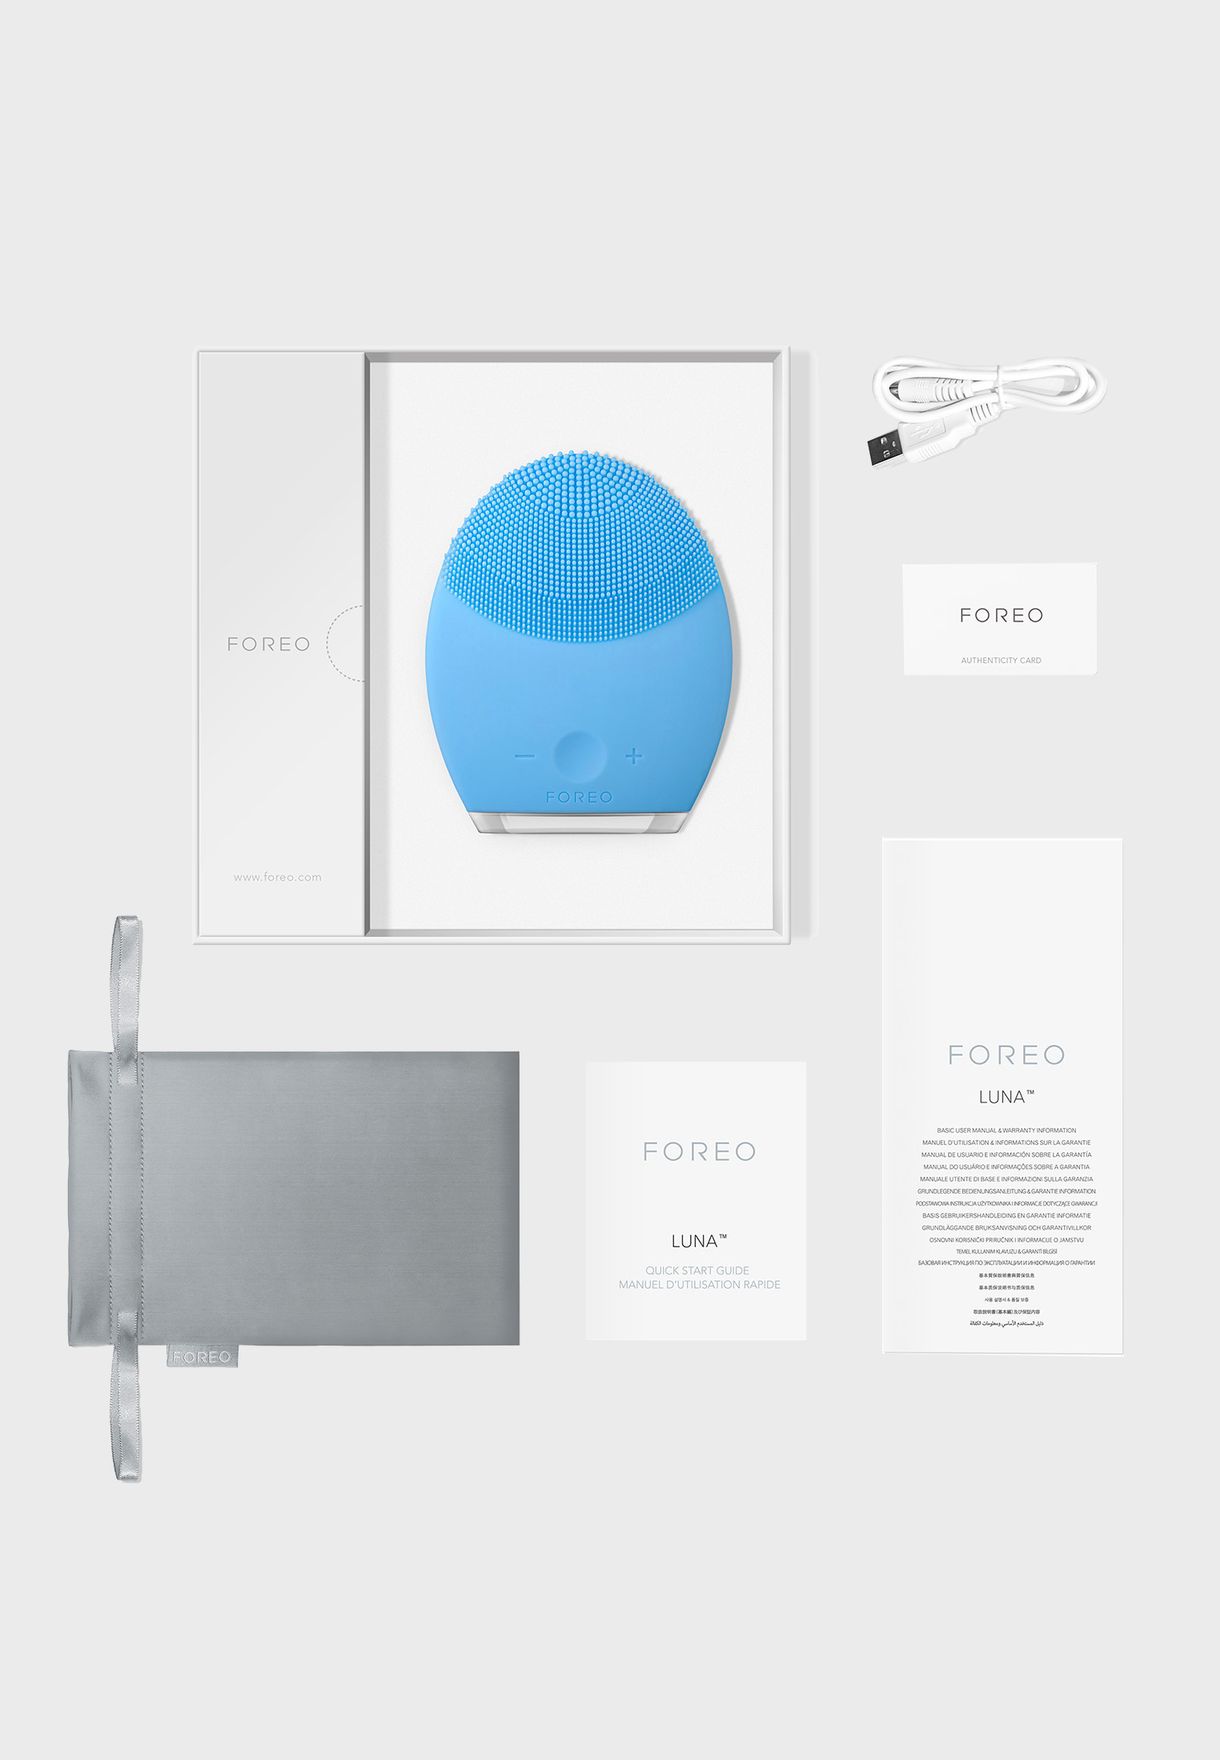 LUNA 2 Facial Cleansing Brush For Combination Skin